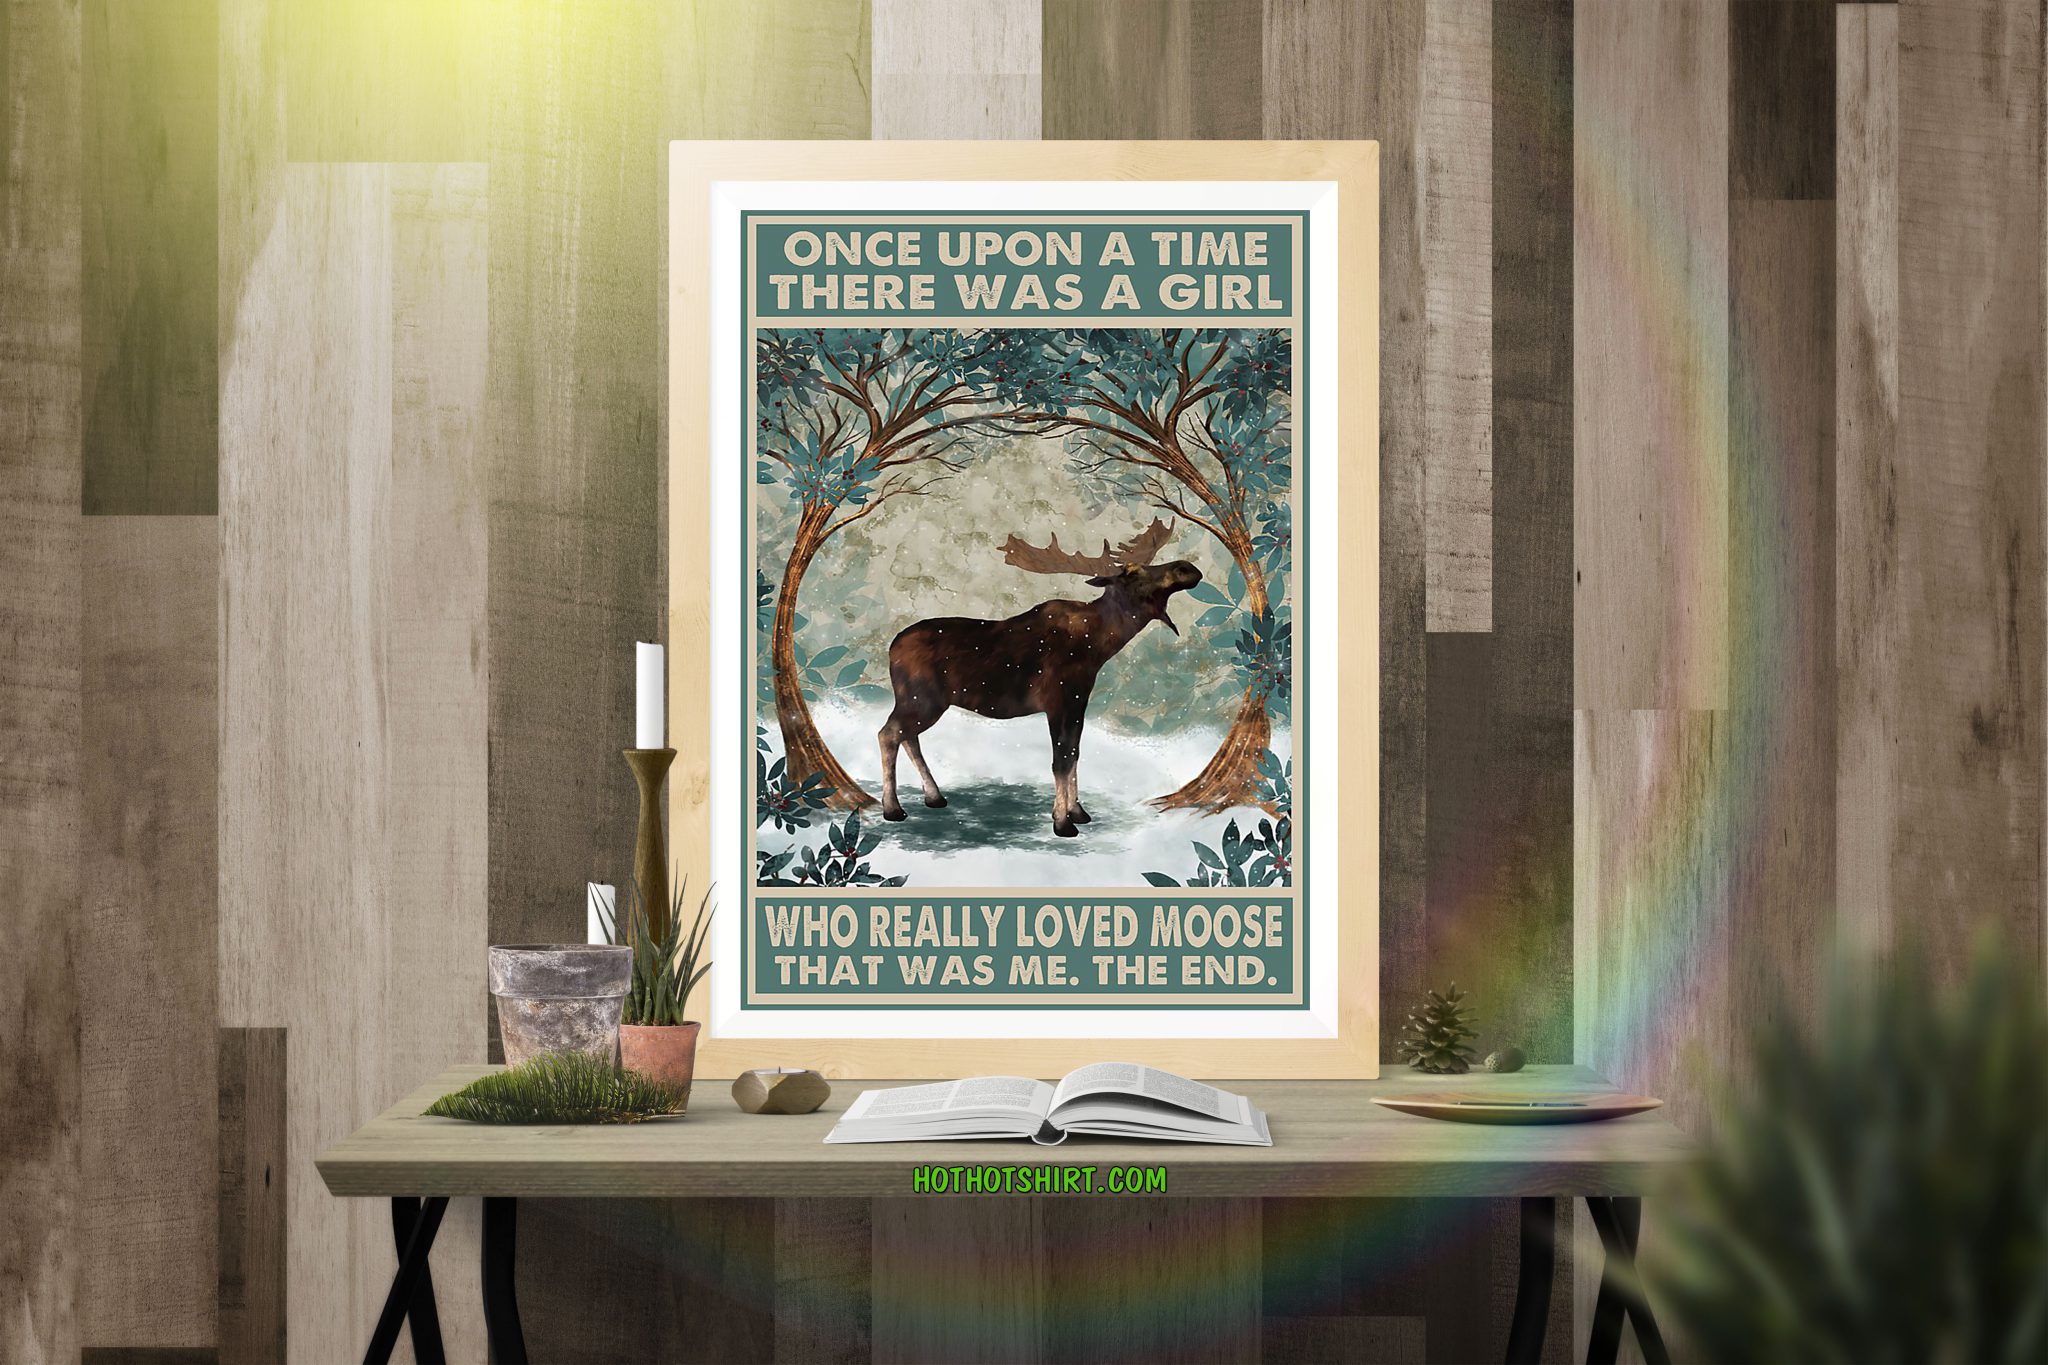 Once upon a time girl who really loved moose poster